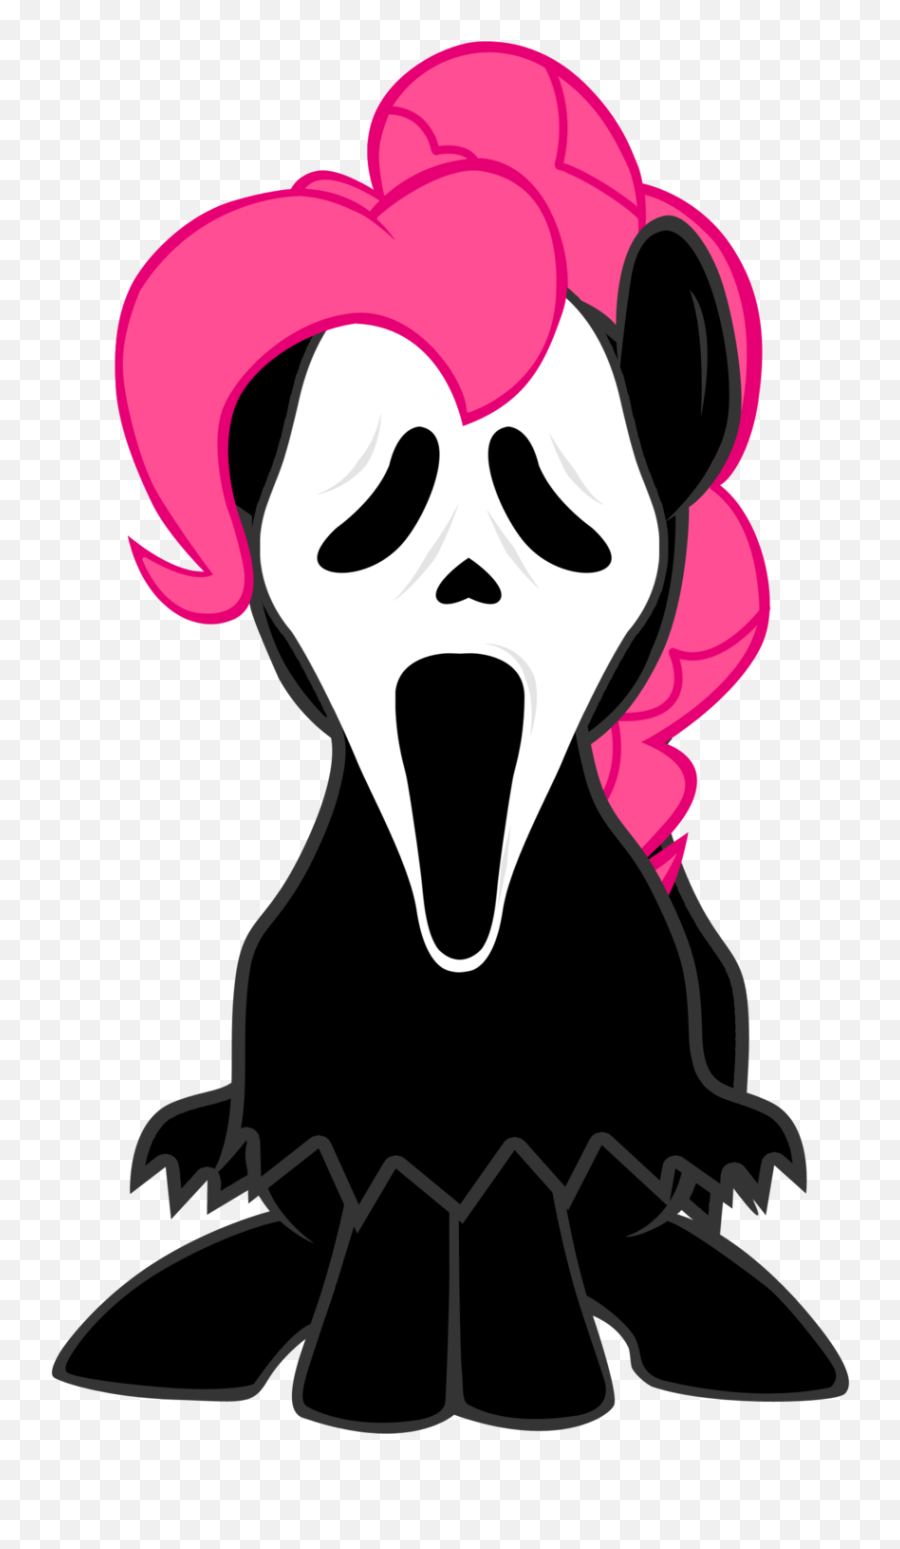 Scary Ghost Face Clip Art - Scary Ghost Face Cartoon Emoji,Ghost Face Emoji Png